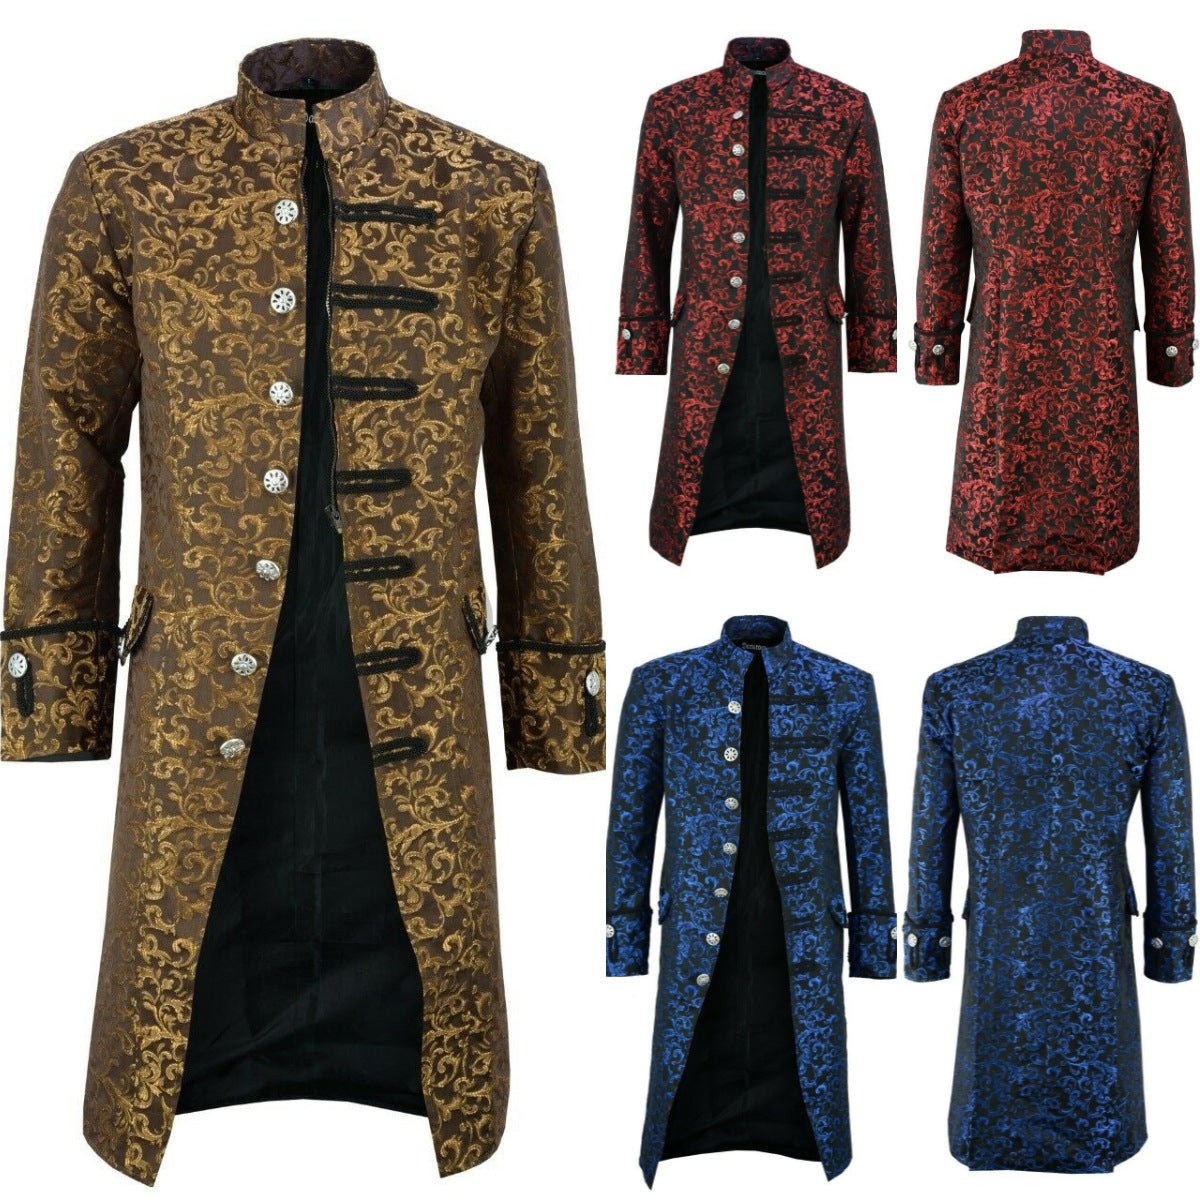 Maramalive™'s Steampunk Victorian coat in different colors.